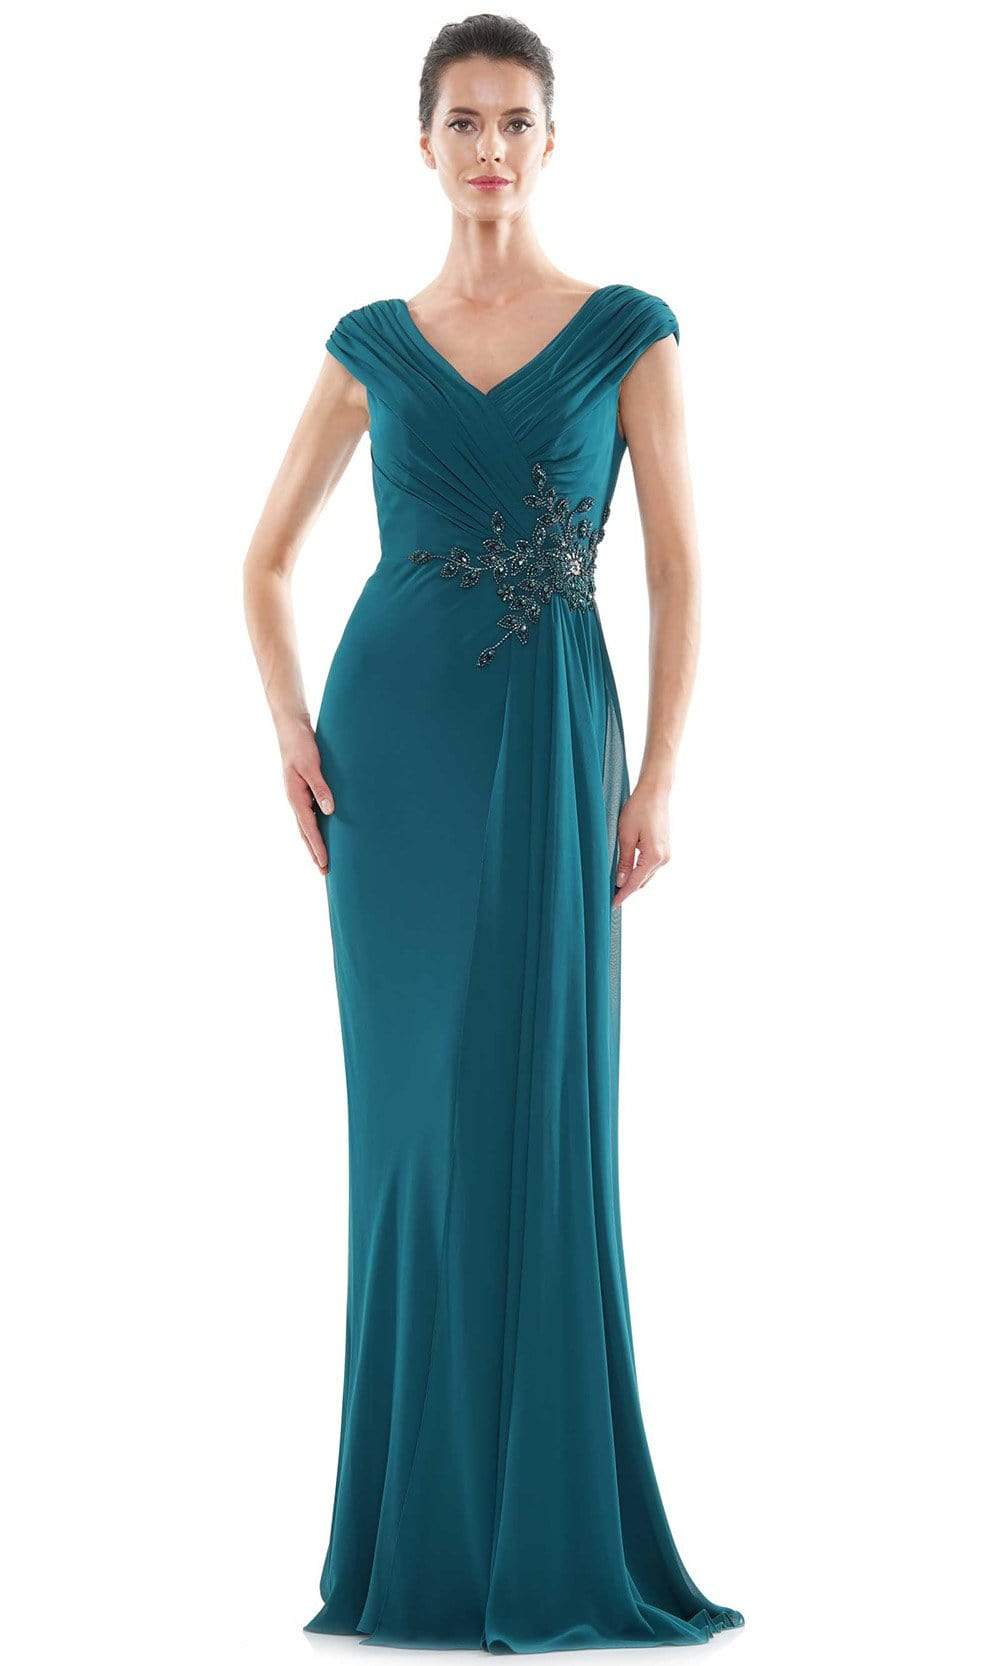 Marsoni by Colors - MV1080 Cap Sleeve Foliage Beaded Sheath Gown Mother of the Bride Dresses 4 / Deep Green